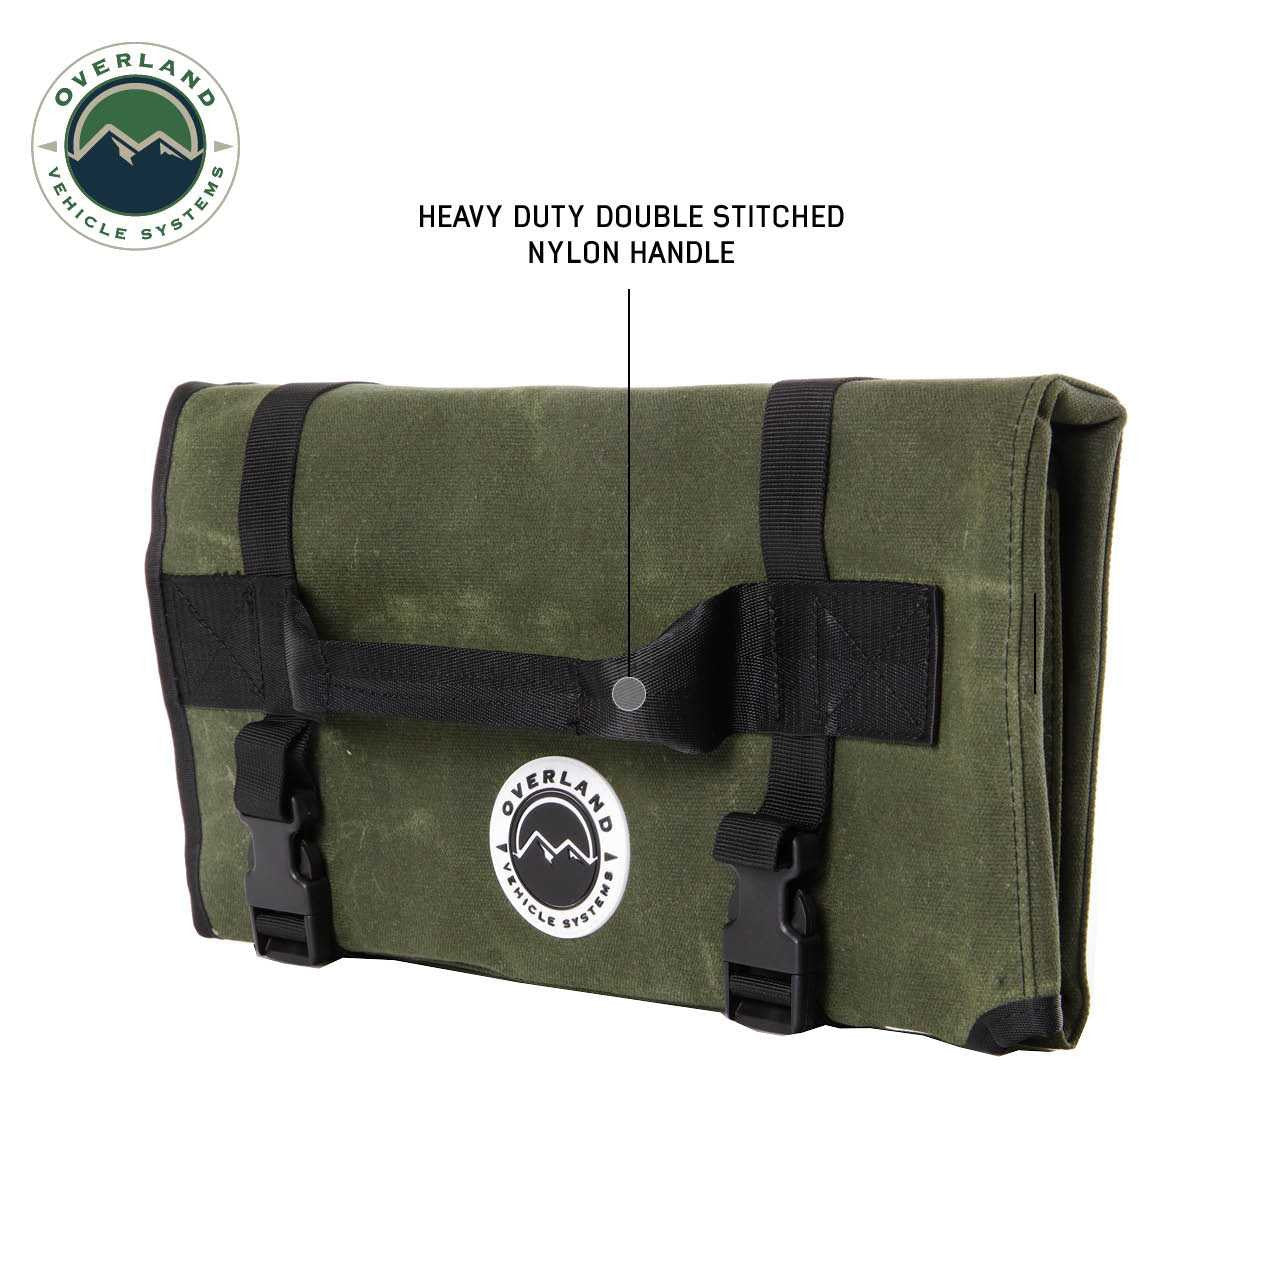 OVS Rolled General Tool Storage Bag - #16 Waxed Canvas